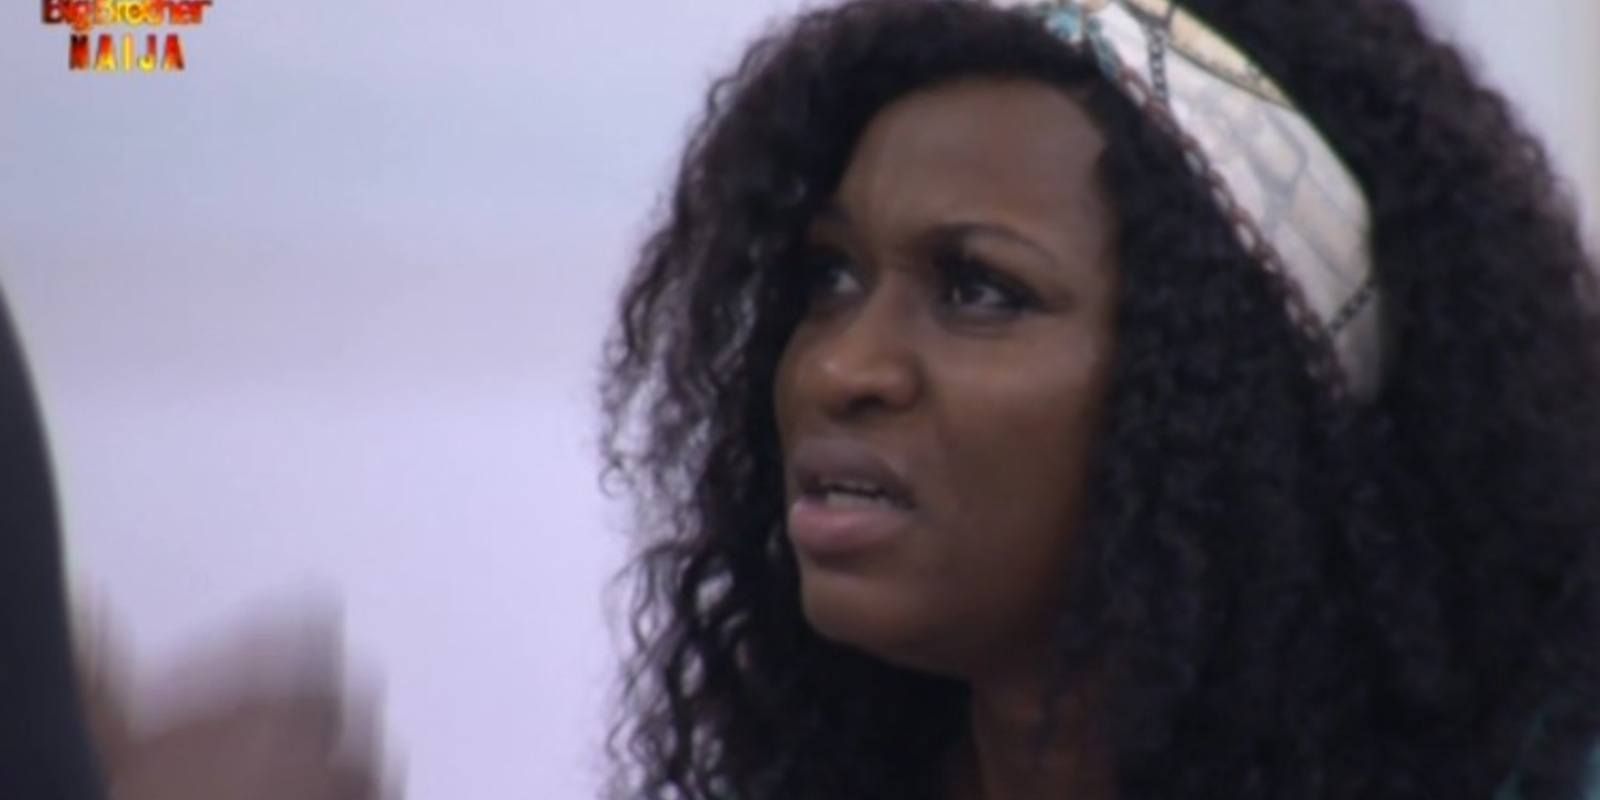 BBNaija 2019 Day 9: Thelma And Esther Fight After Clash of Words (Video)